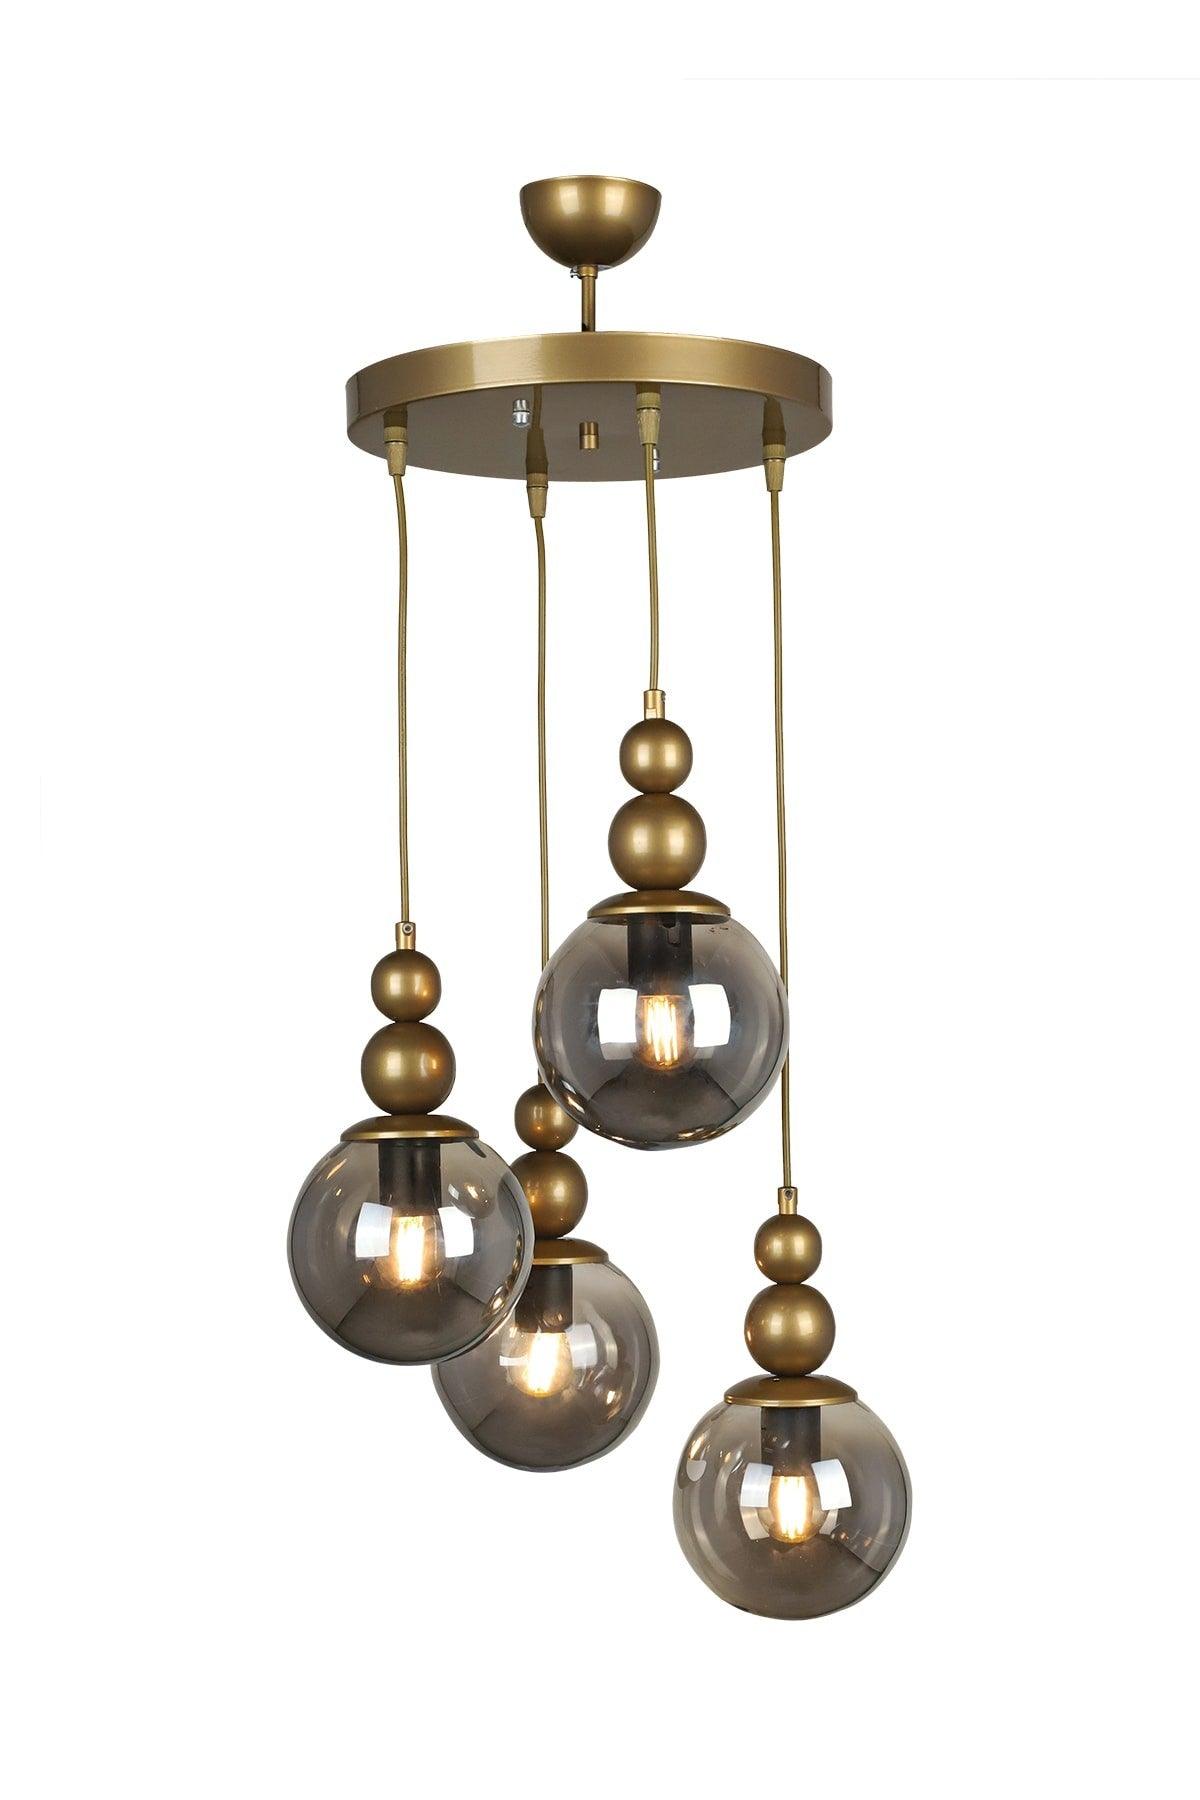 Endless 4 Piece Chandelier Tumbled Smoked Glass - Swordslife